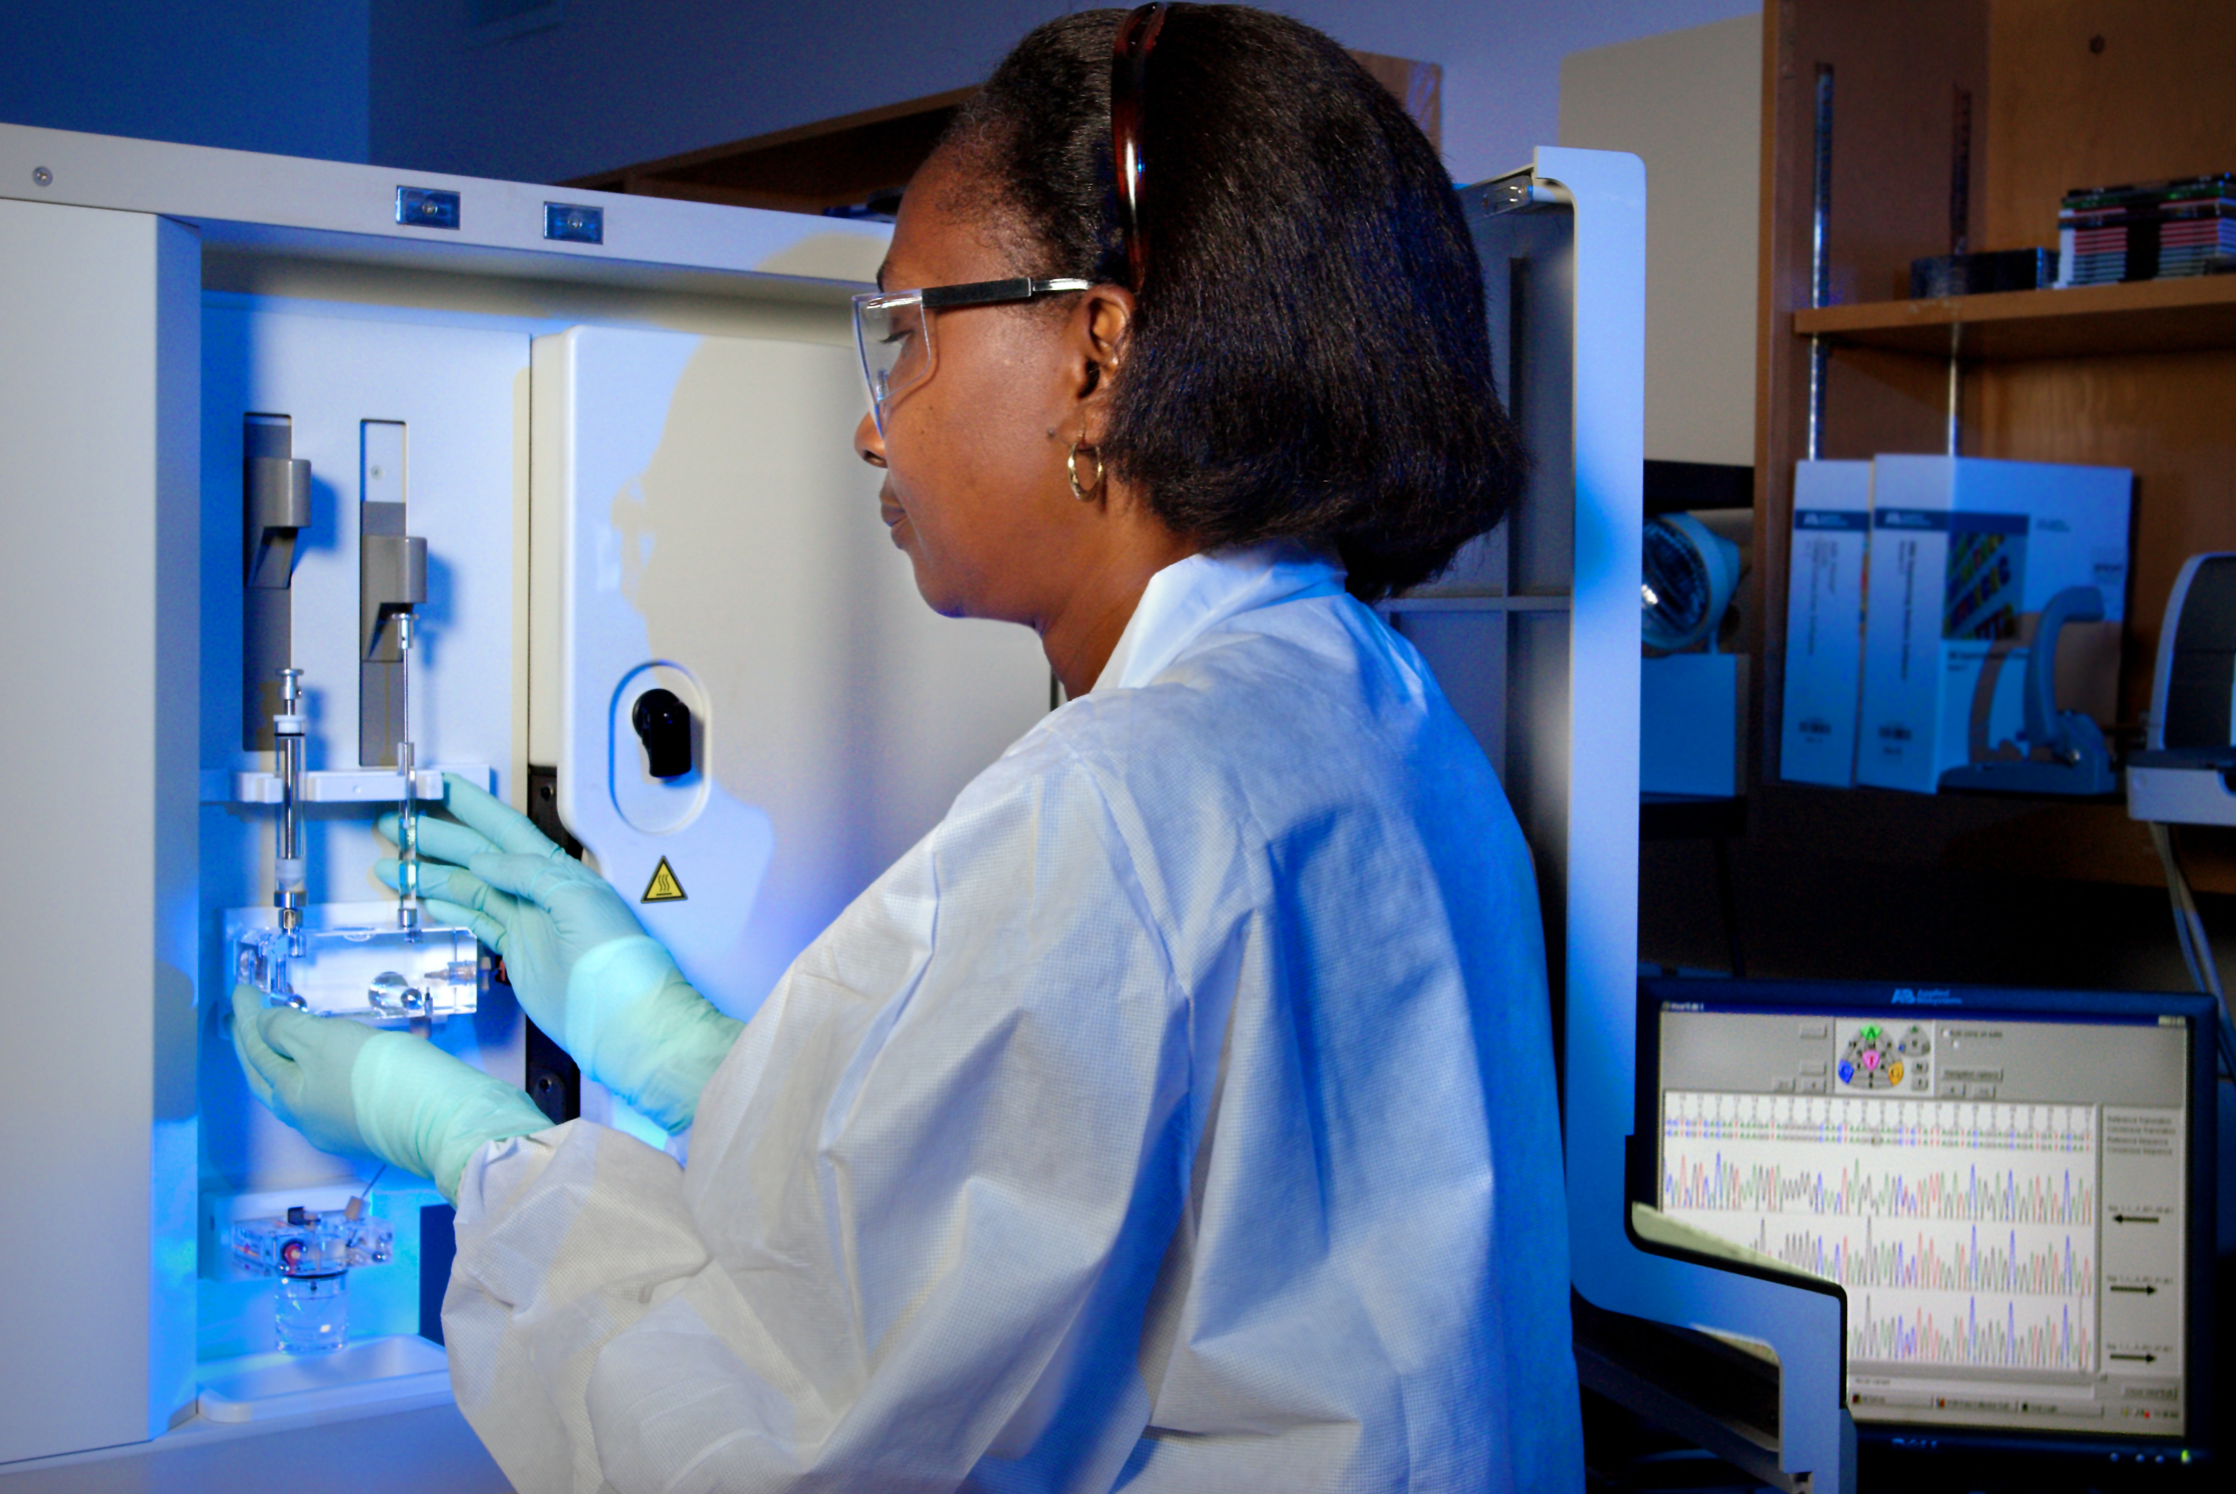 This 2007 photograph depicts CDC Guest Researcher, Dr. Karidia Diallo, preparing the ABI DNA Analyzer. Image by CDC/Hsi Liu, Ph.D., MBA; James Gathany, Public Domain.